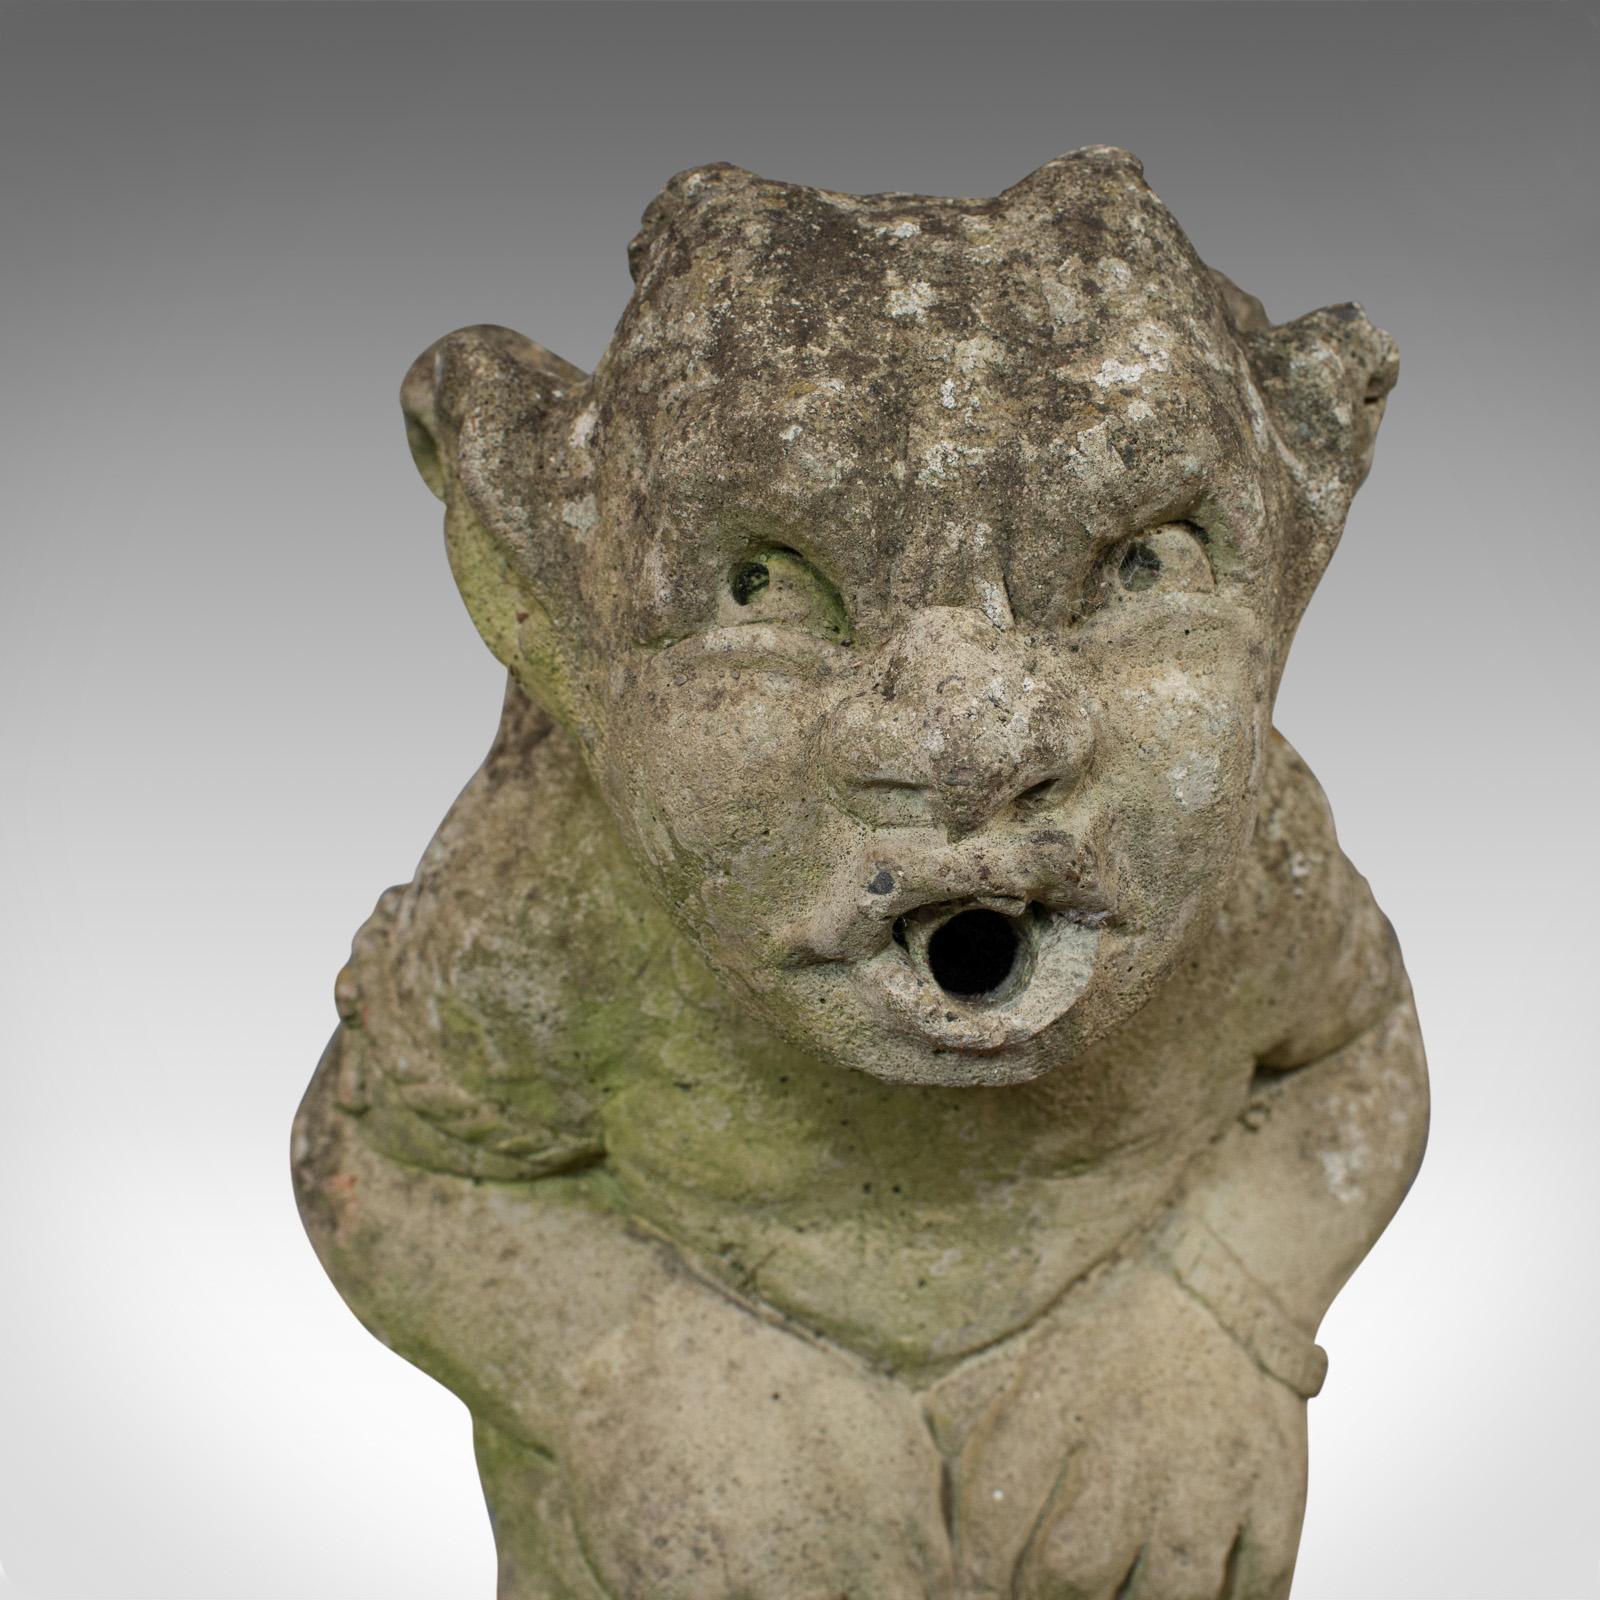 Vintage Gargoyle, English, Reconstituted Stone, Outdoor Ornament, Water Feature 3